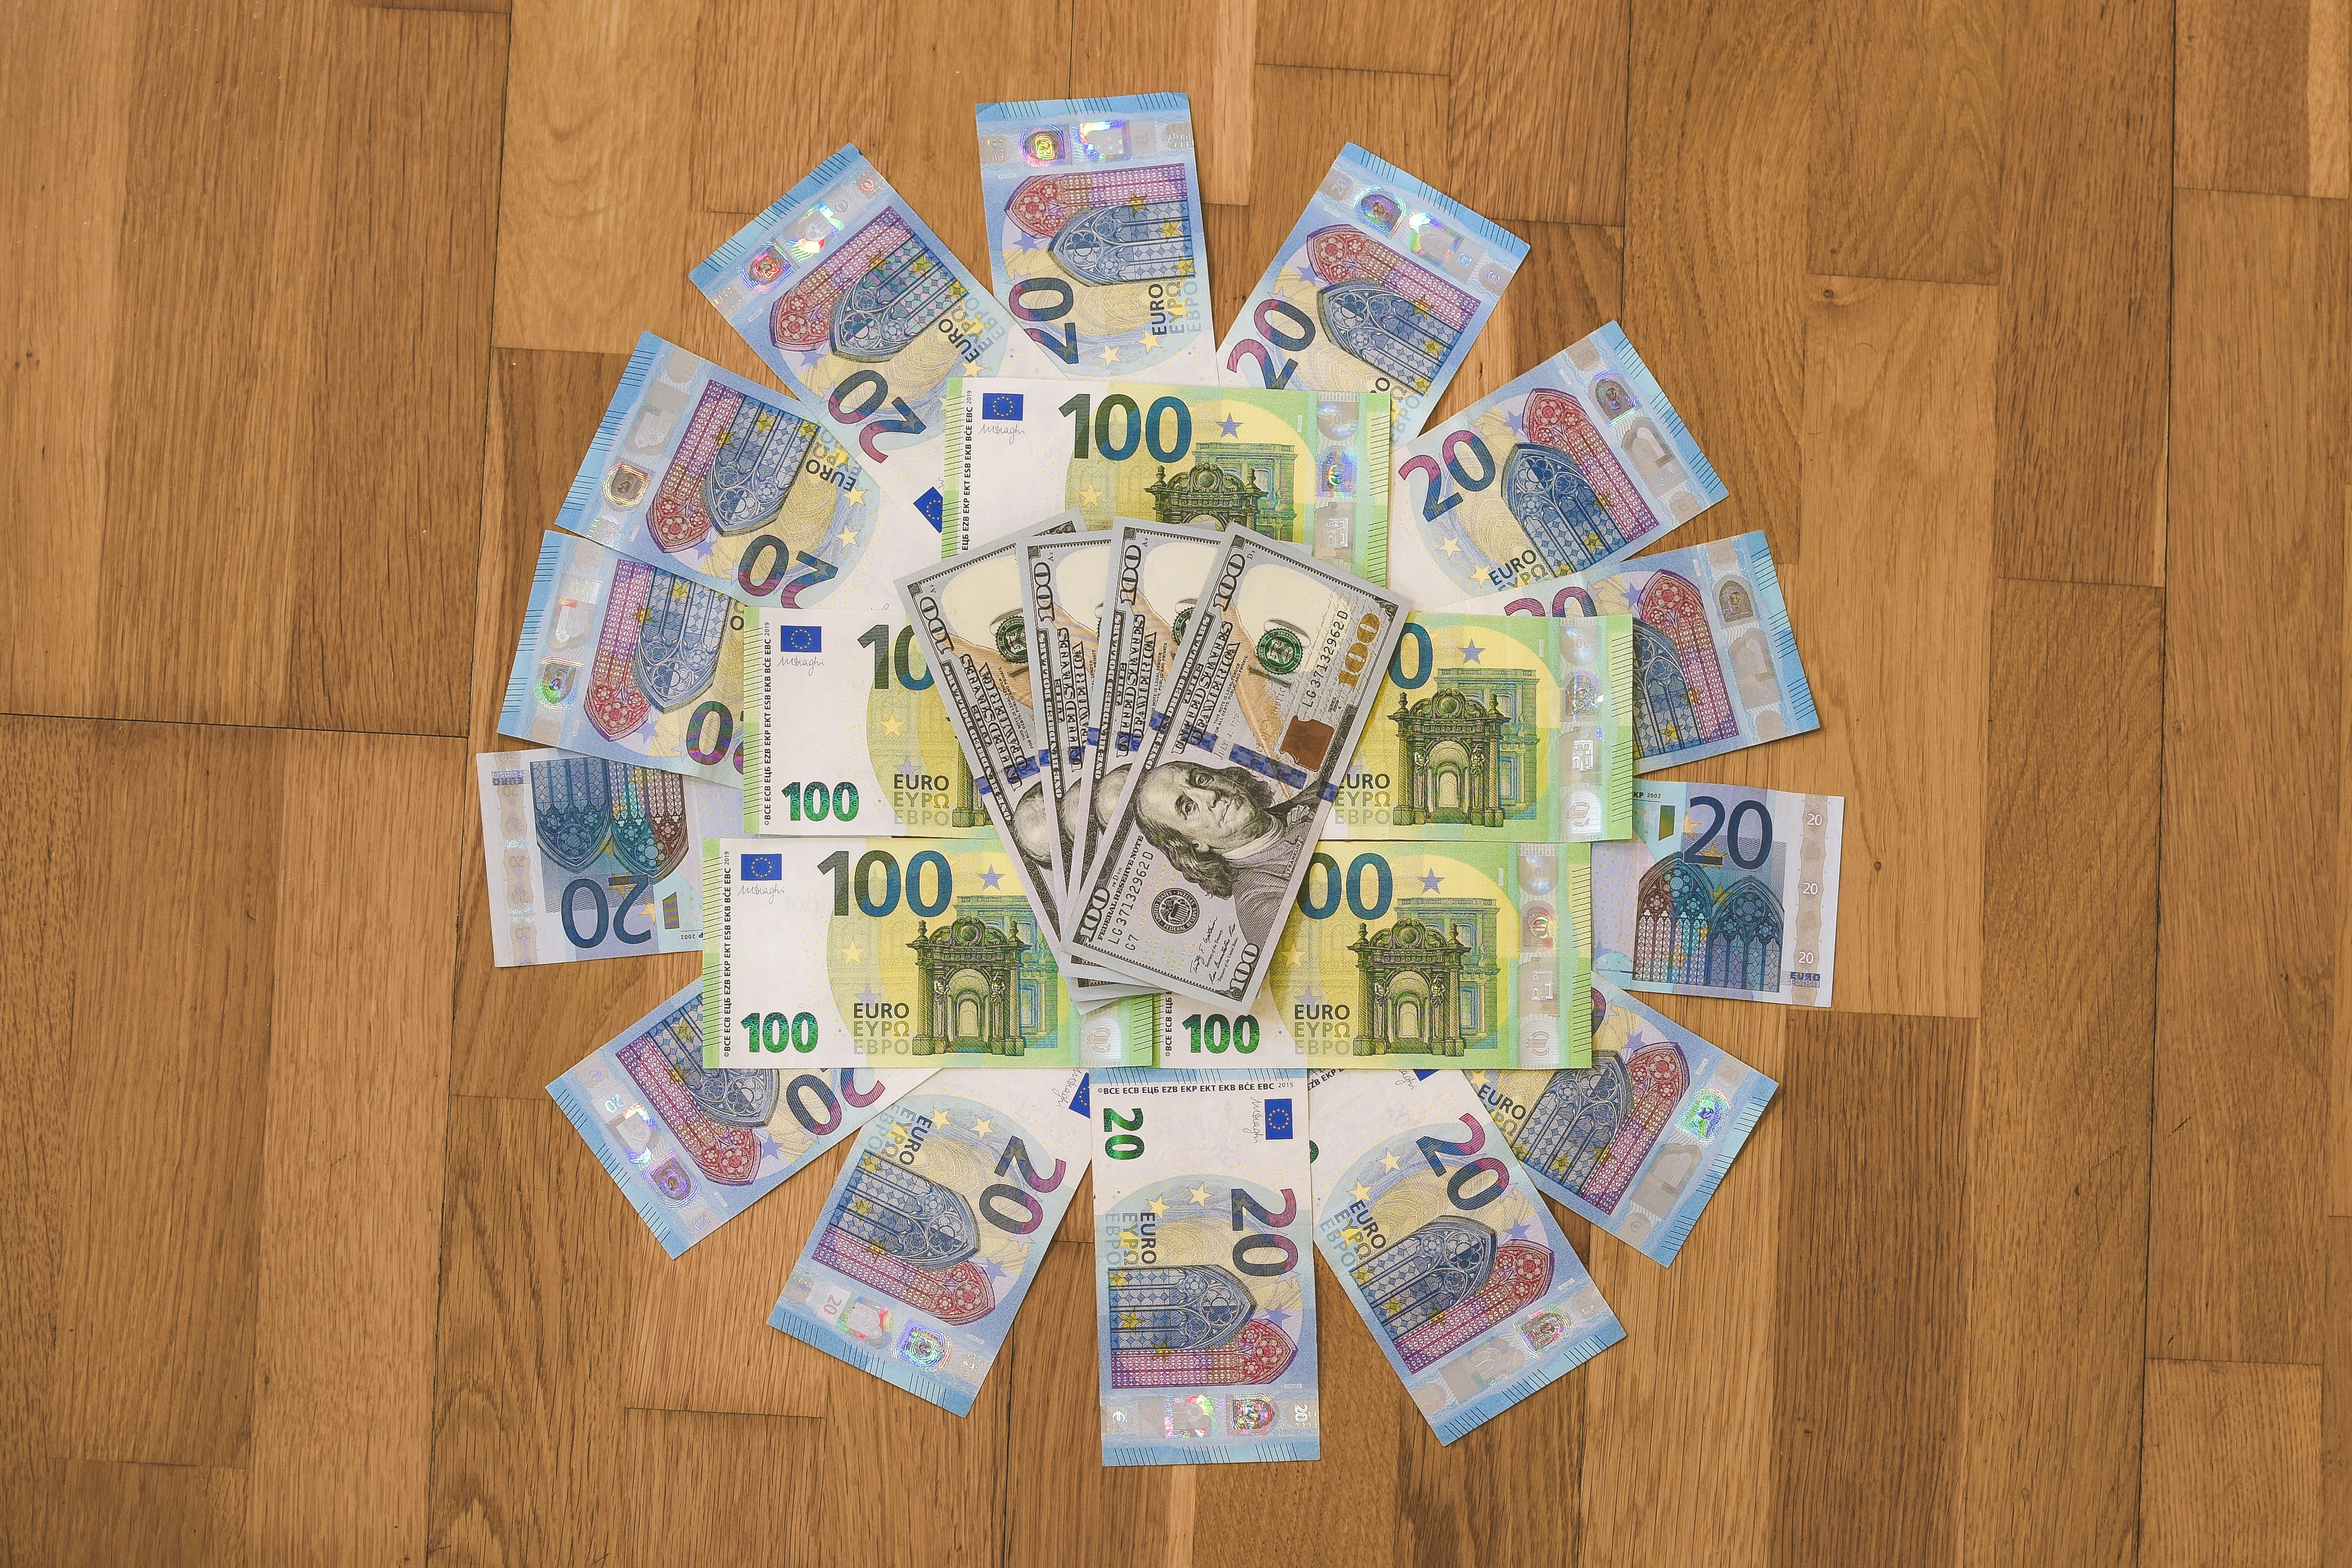 20, 100 Euro (EUR), and 100 Dollar (USD) banknotes placed on a wooden surface in a circular shape.